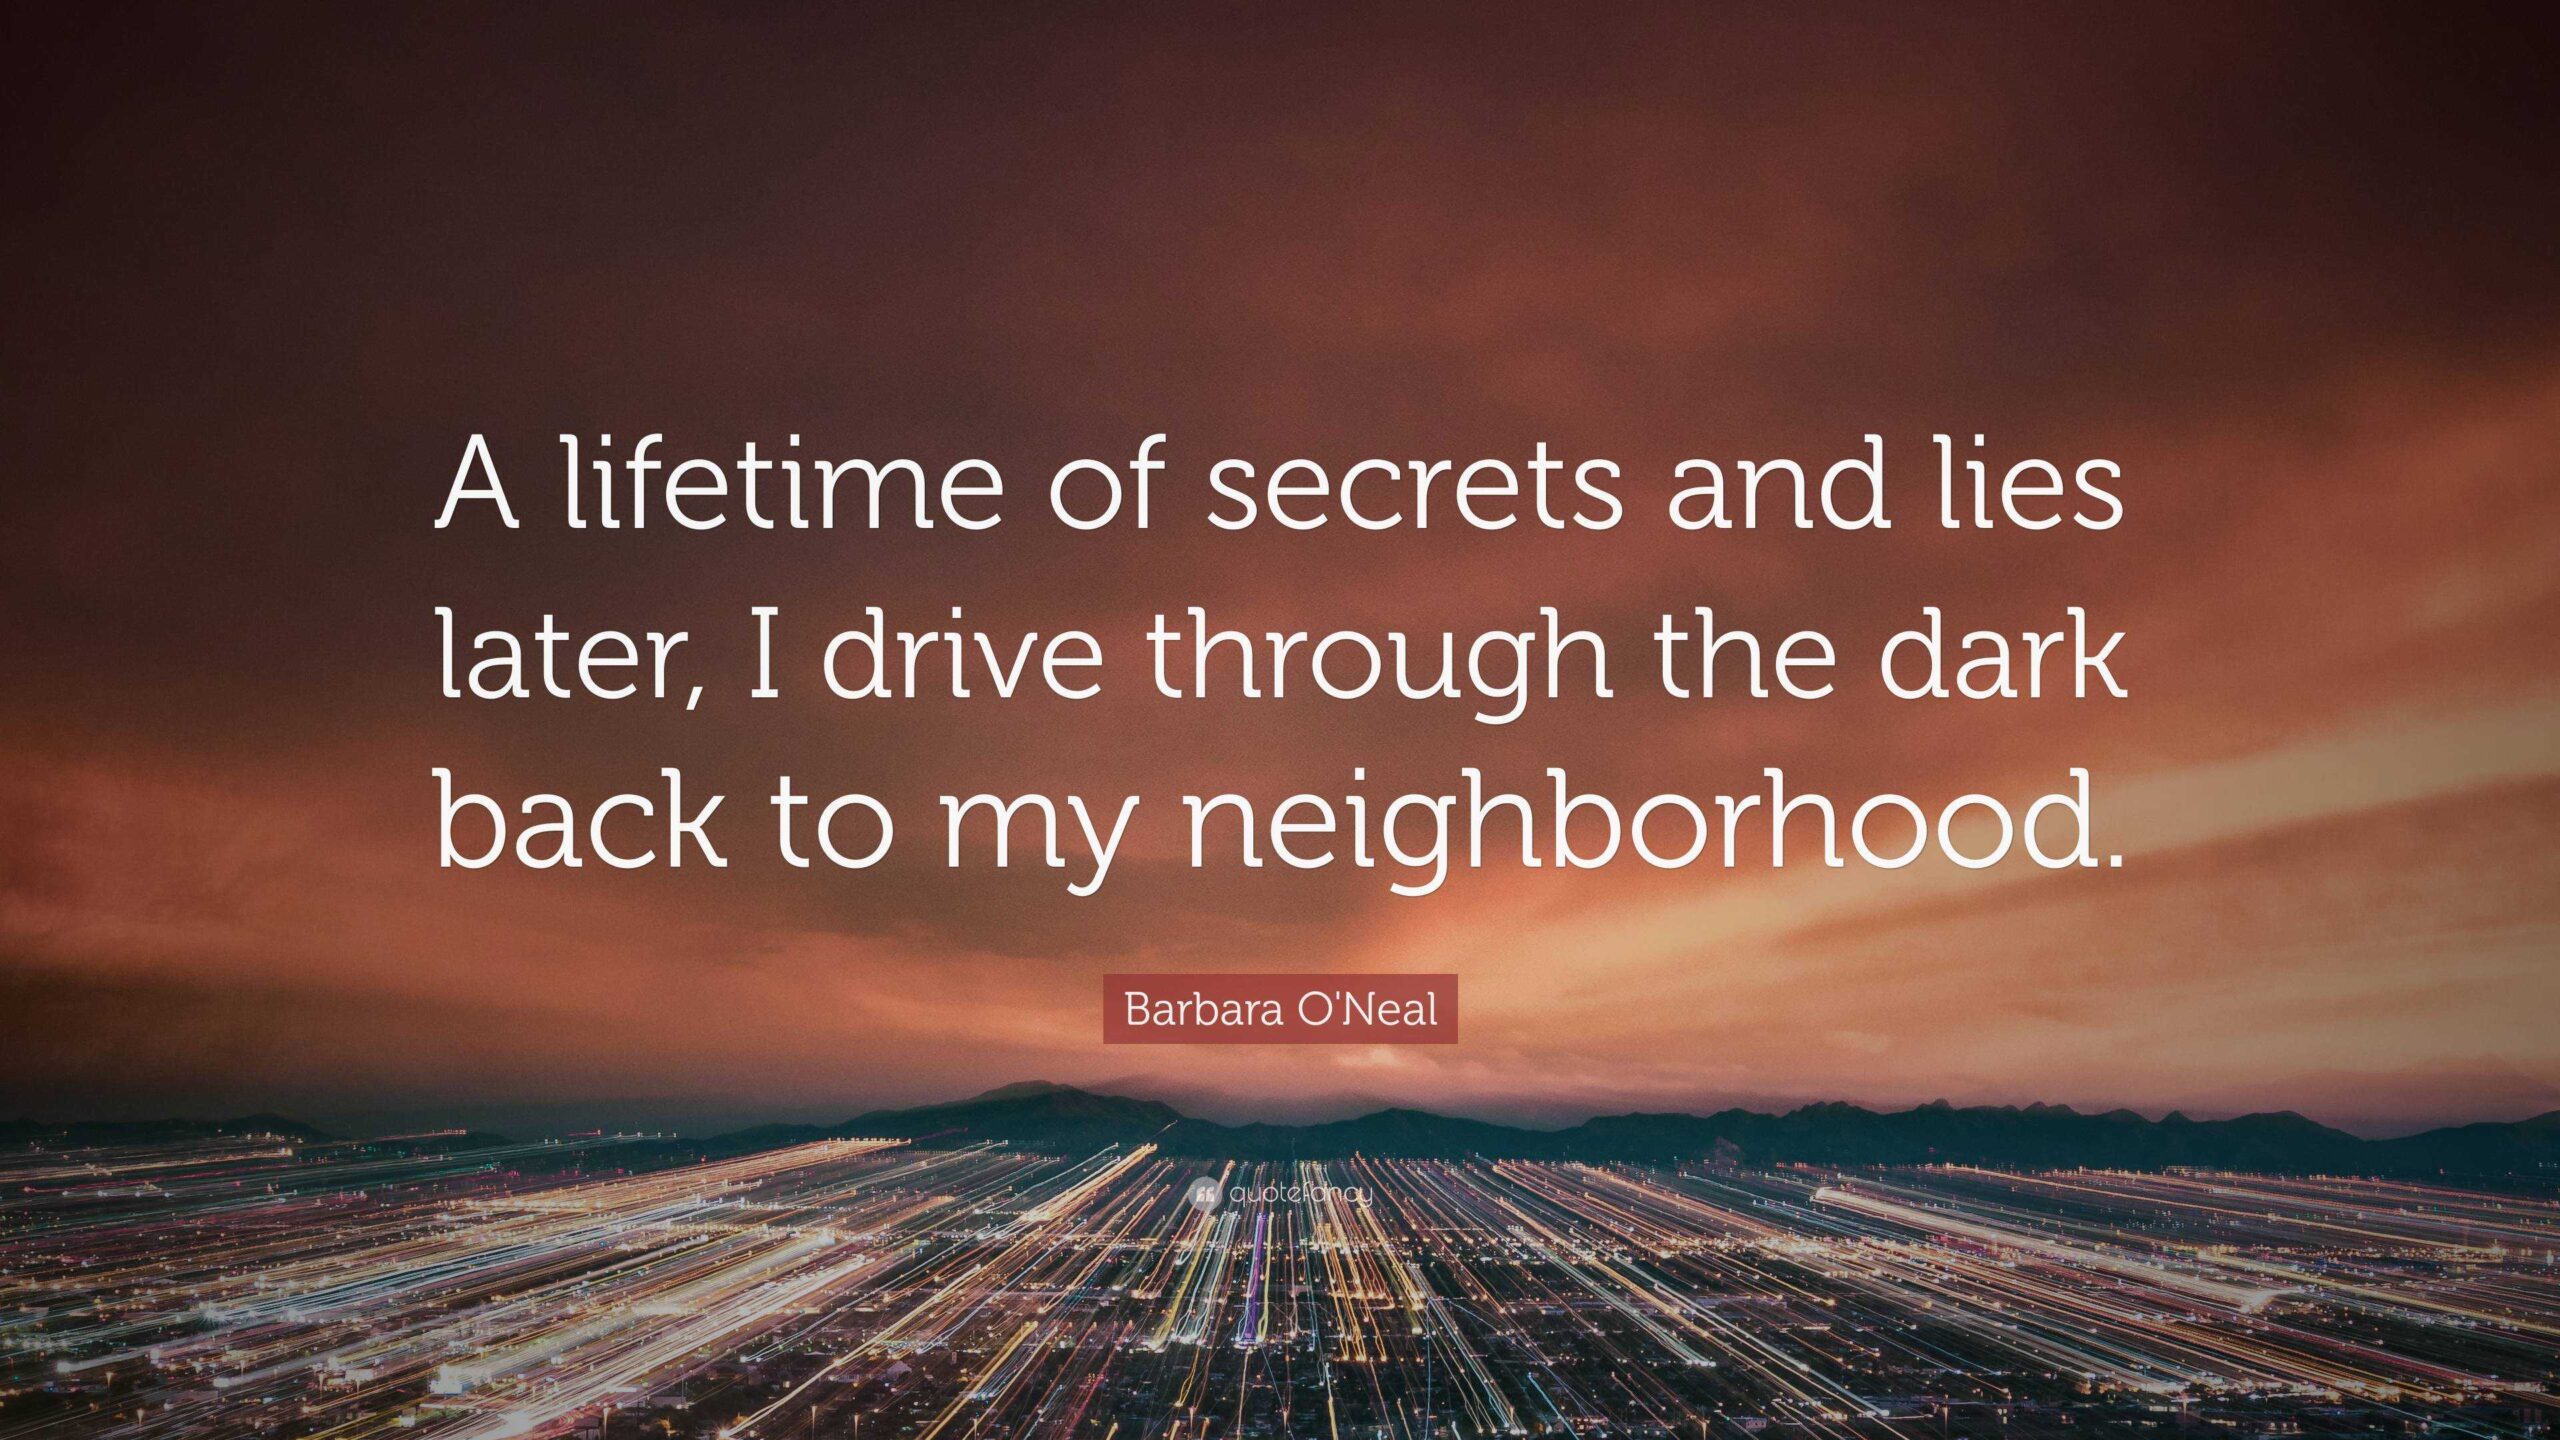 Quotes About Secrets And Lies A Lifetime Of Secrets And Lies Later I Drive